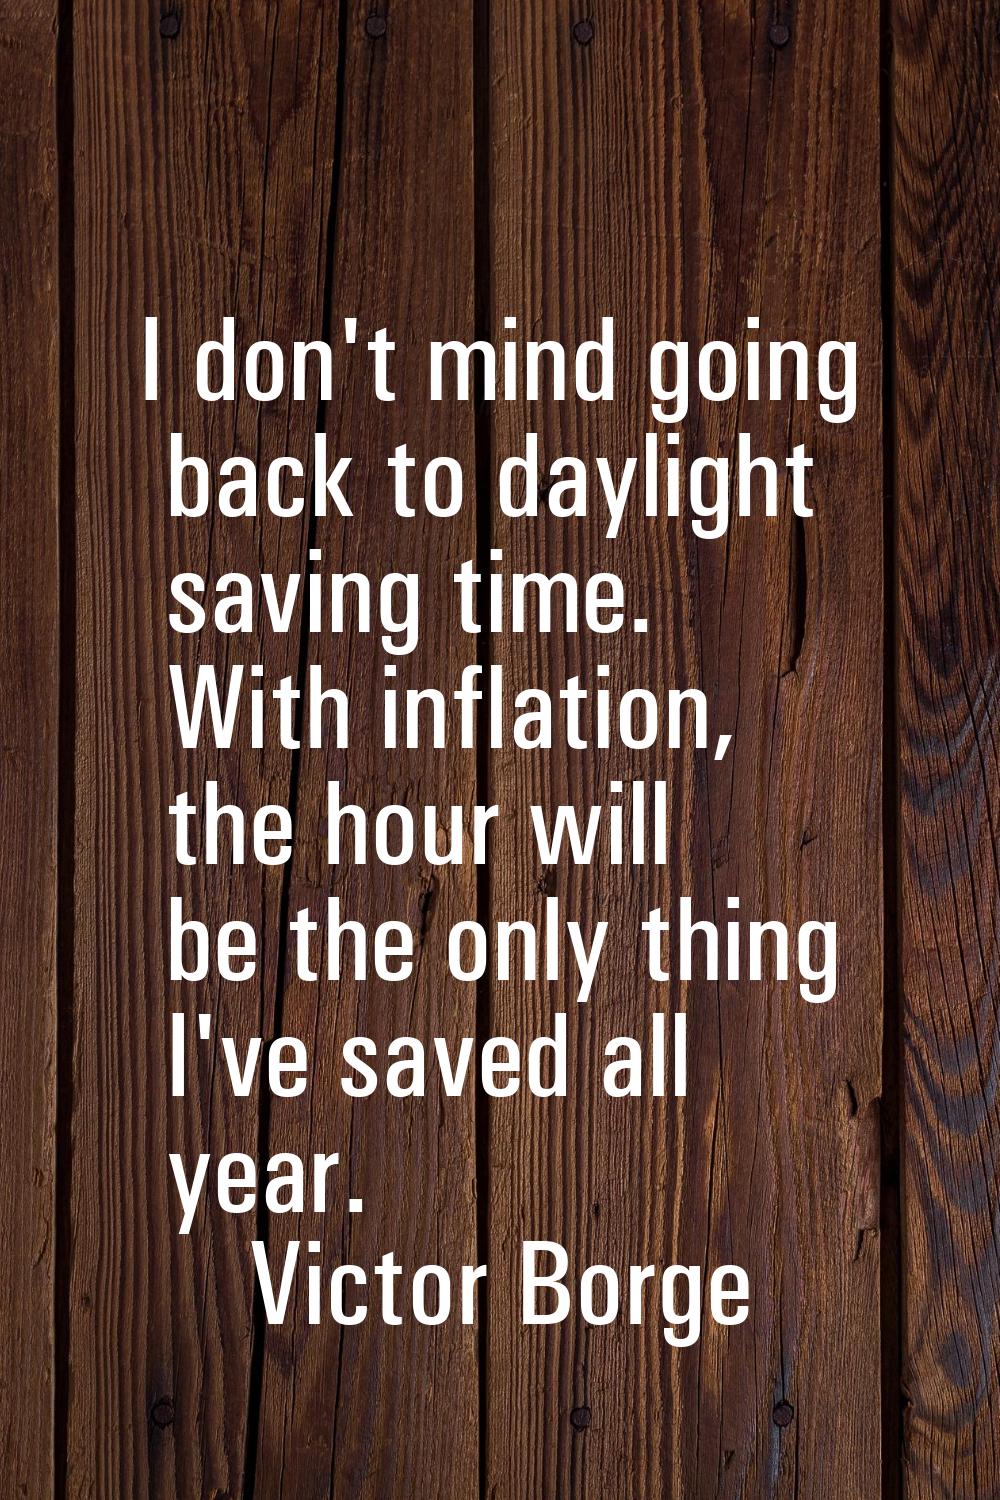 I don't mind going back to daylight saving time. With inflation, the hour will be the only thing I'